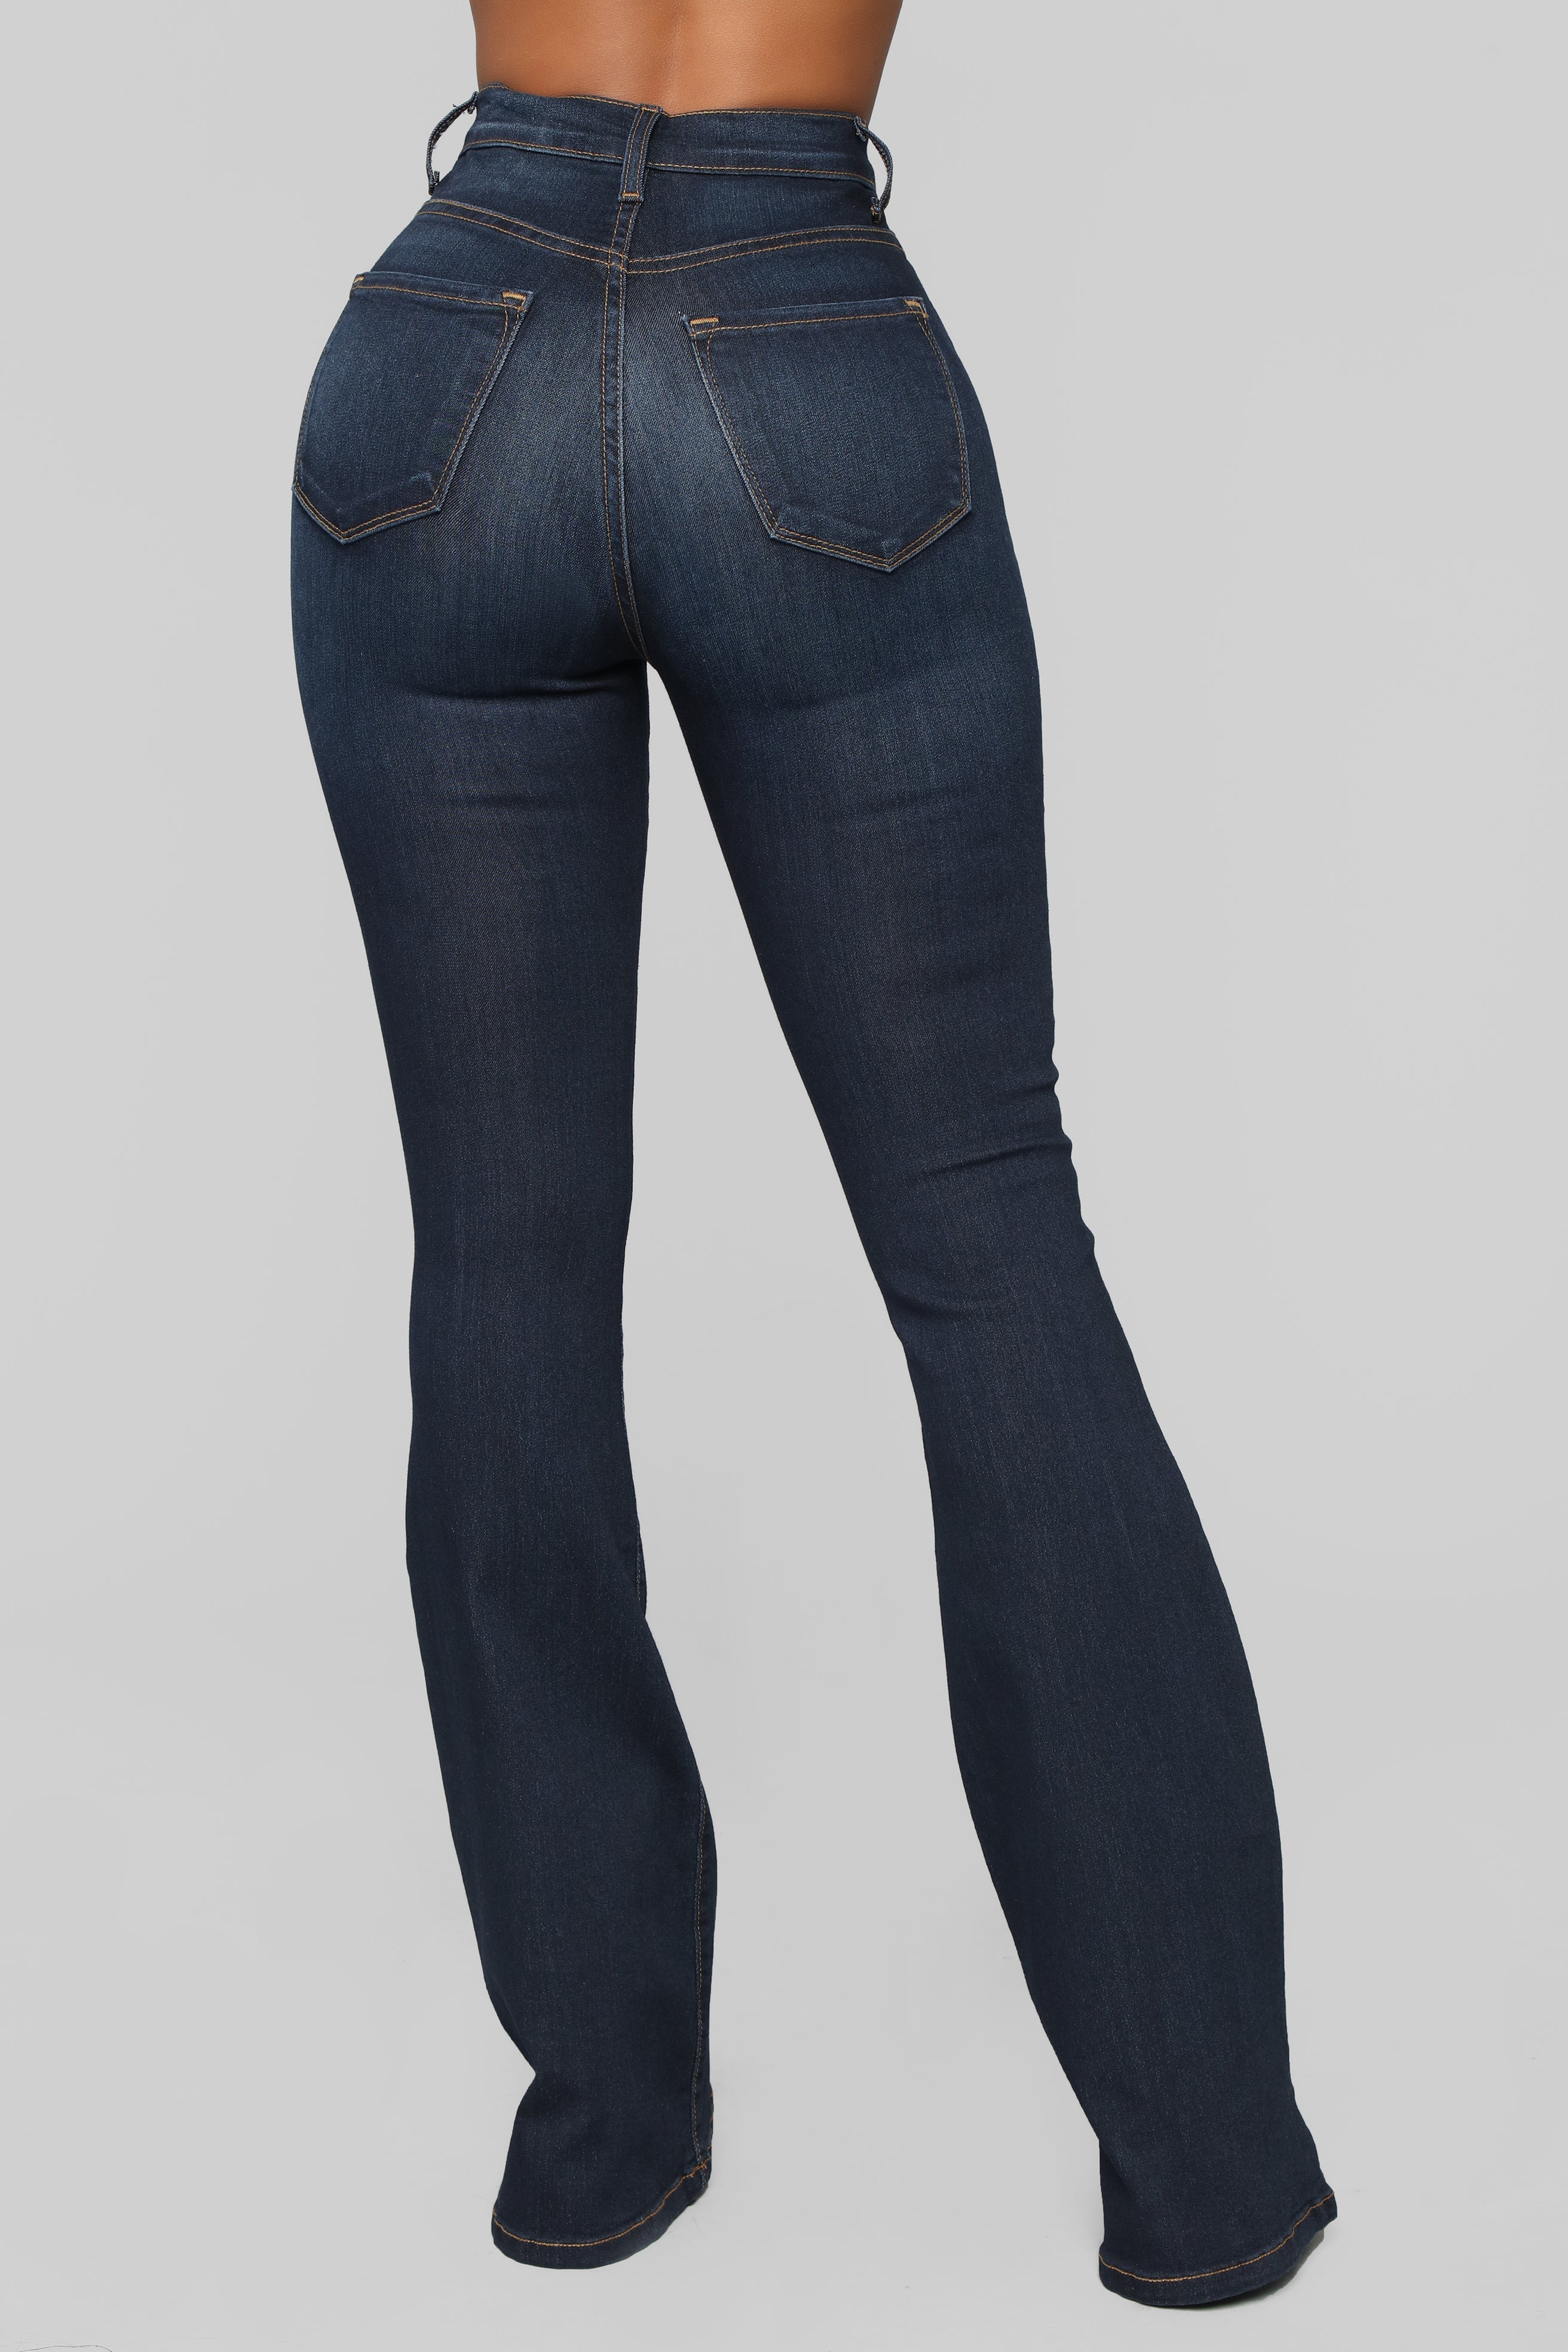 Deep In My Soul Flare Jeans - Medium Blue Wash  Flare jeans, Bootcut  pants, High waisted denim